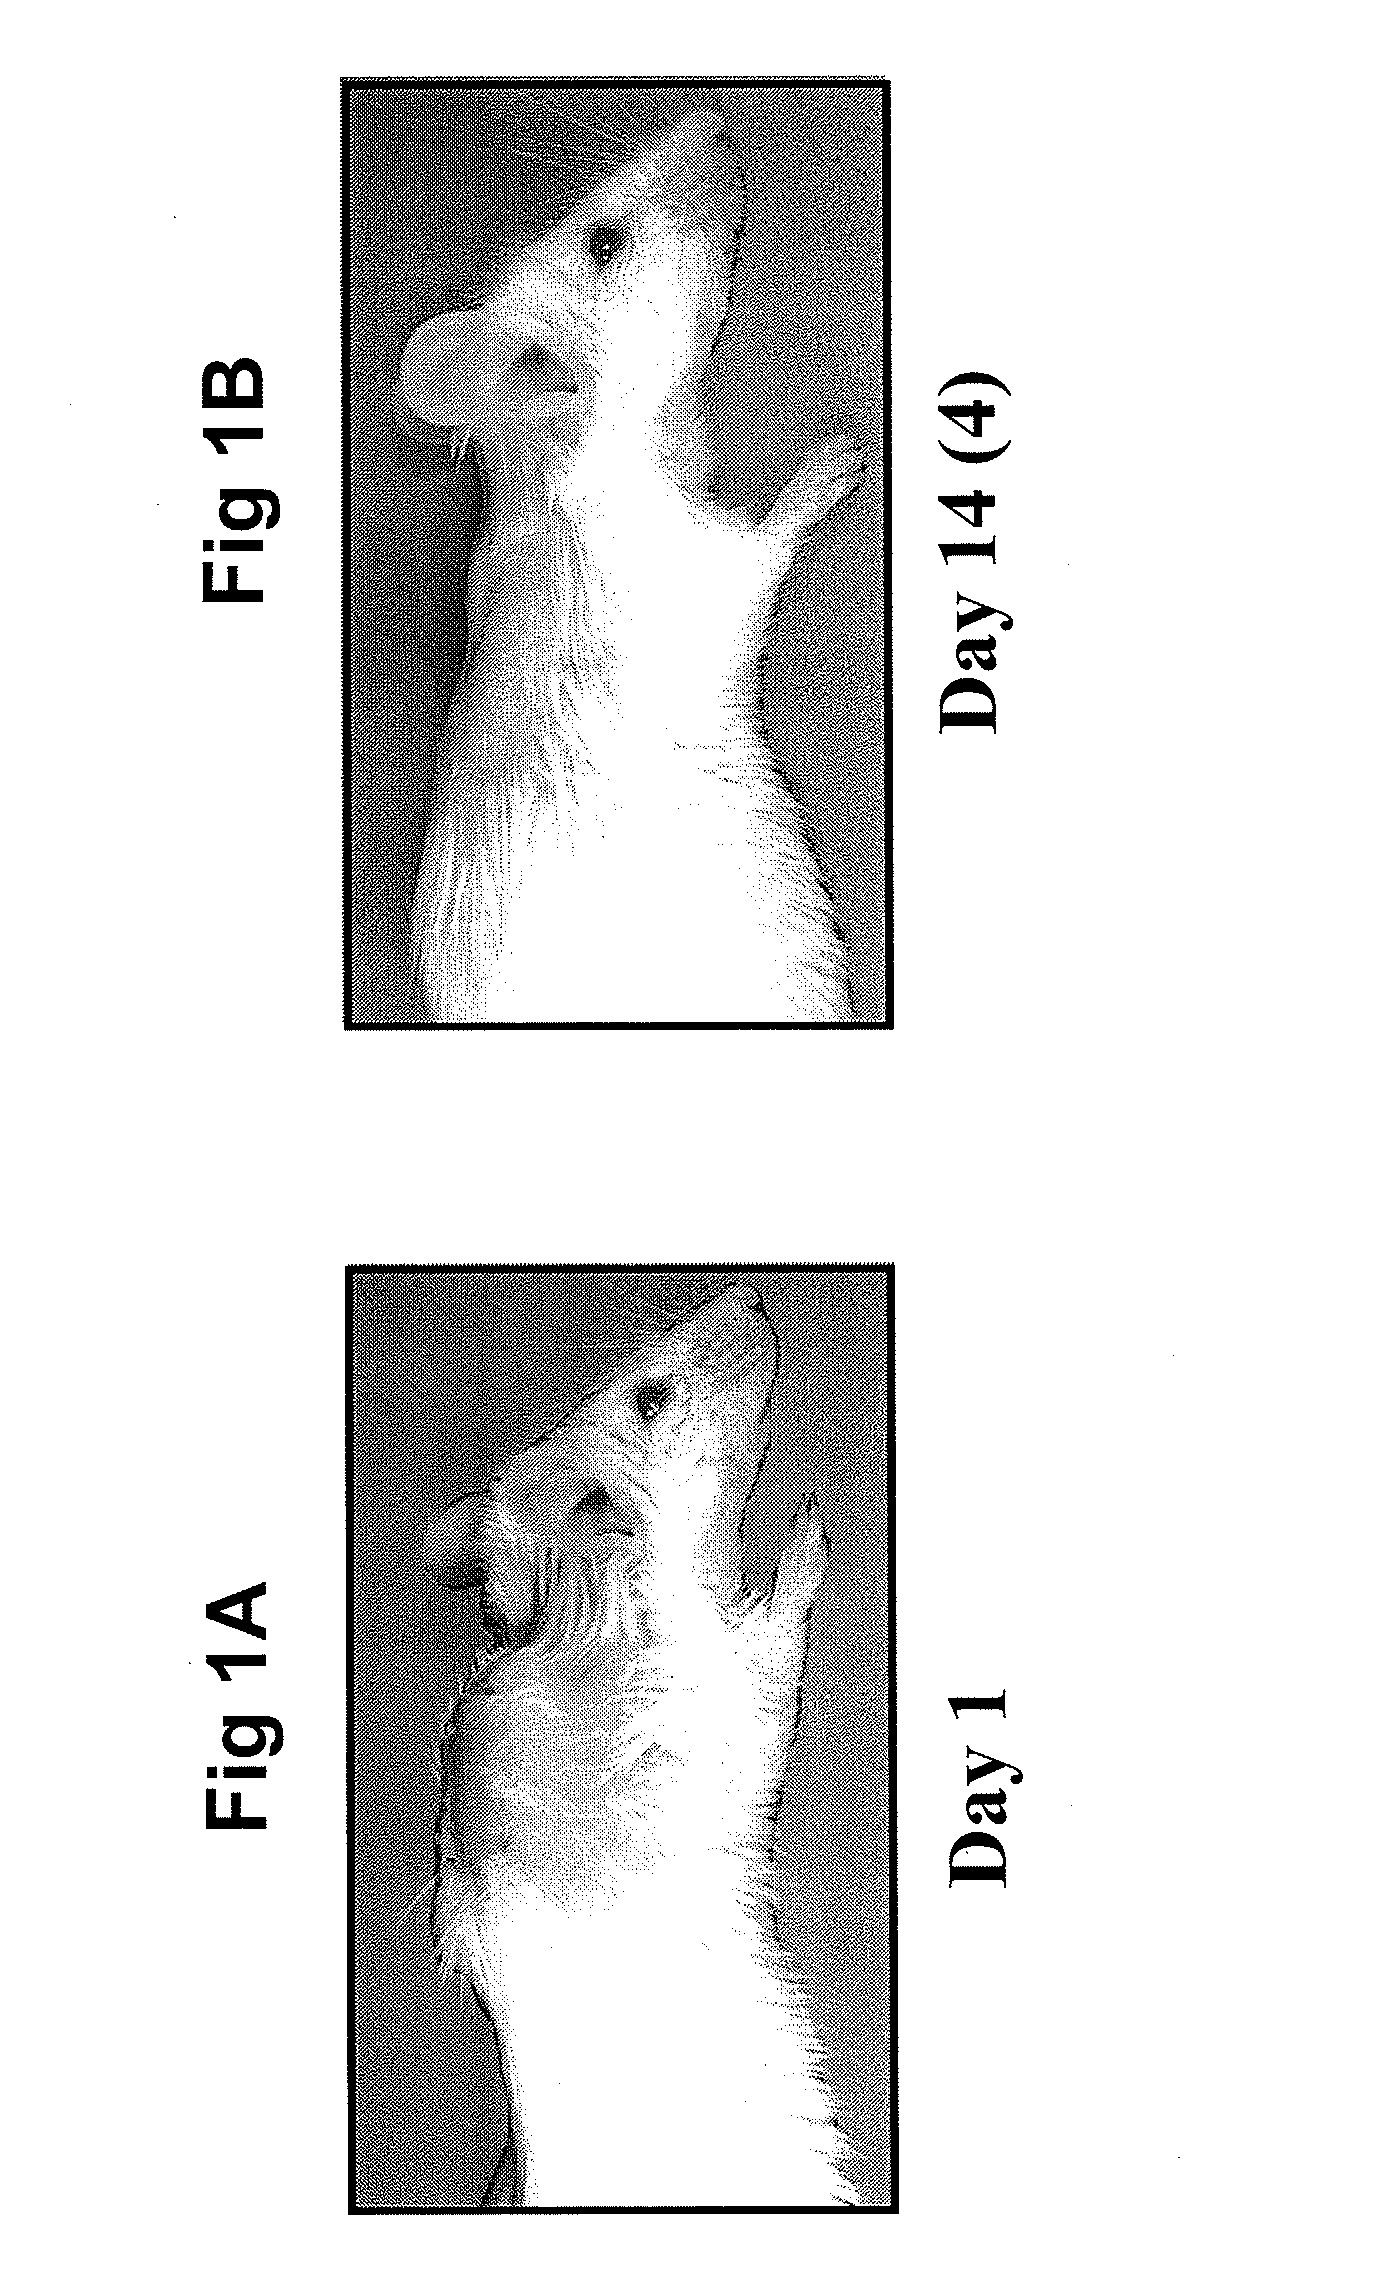 Methods for amyloid removal using Anti-amyloid antibodies